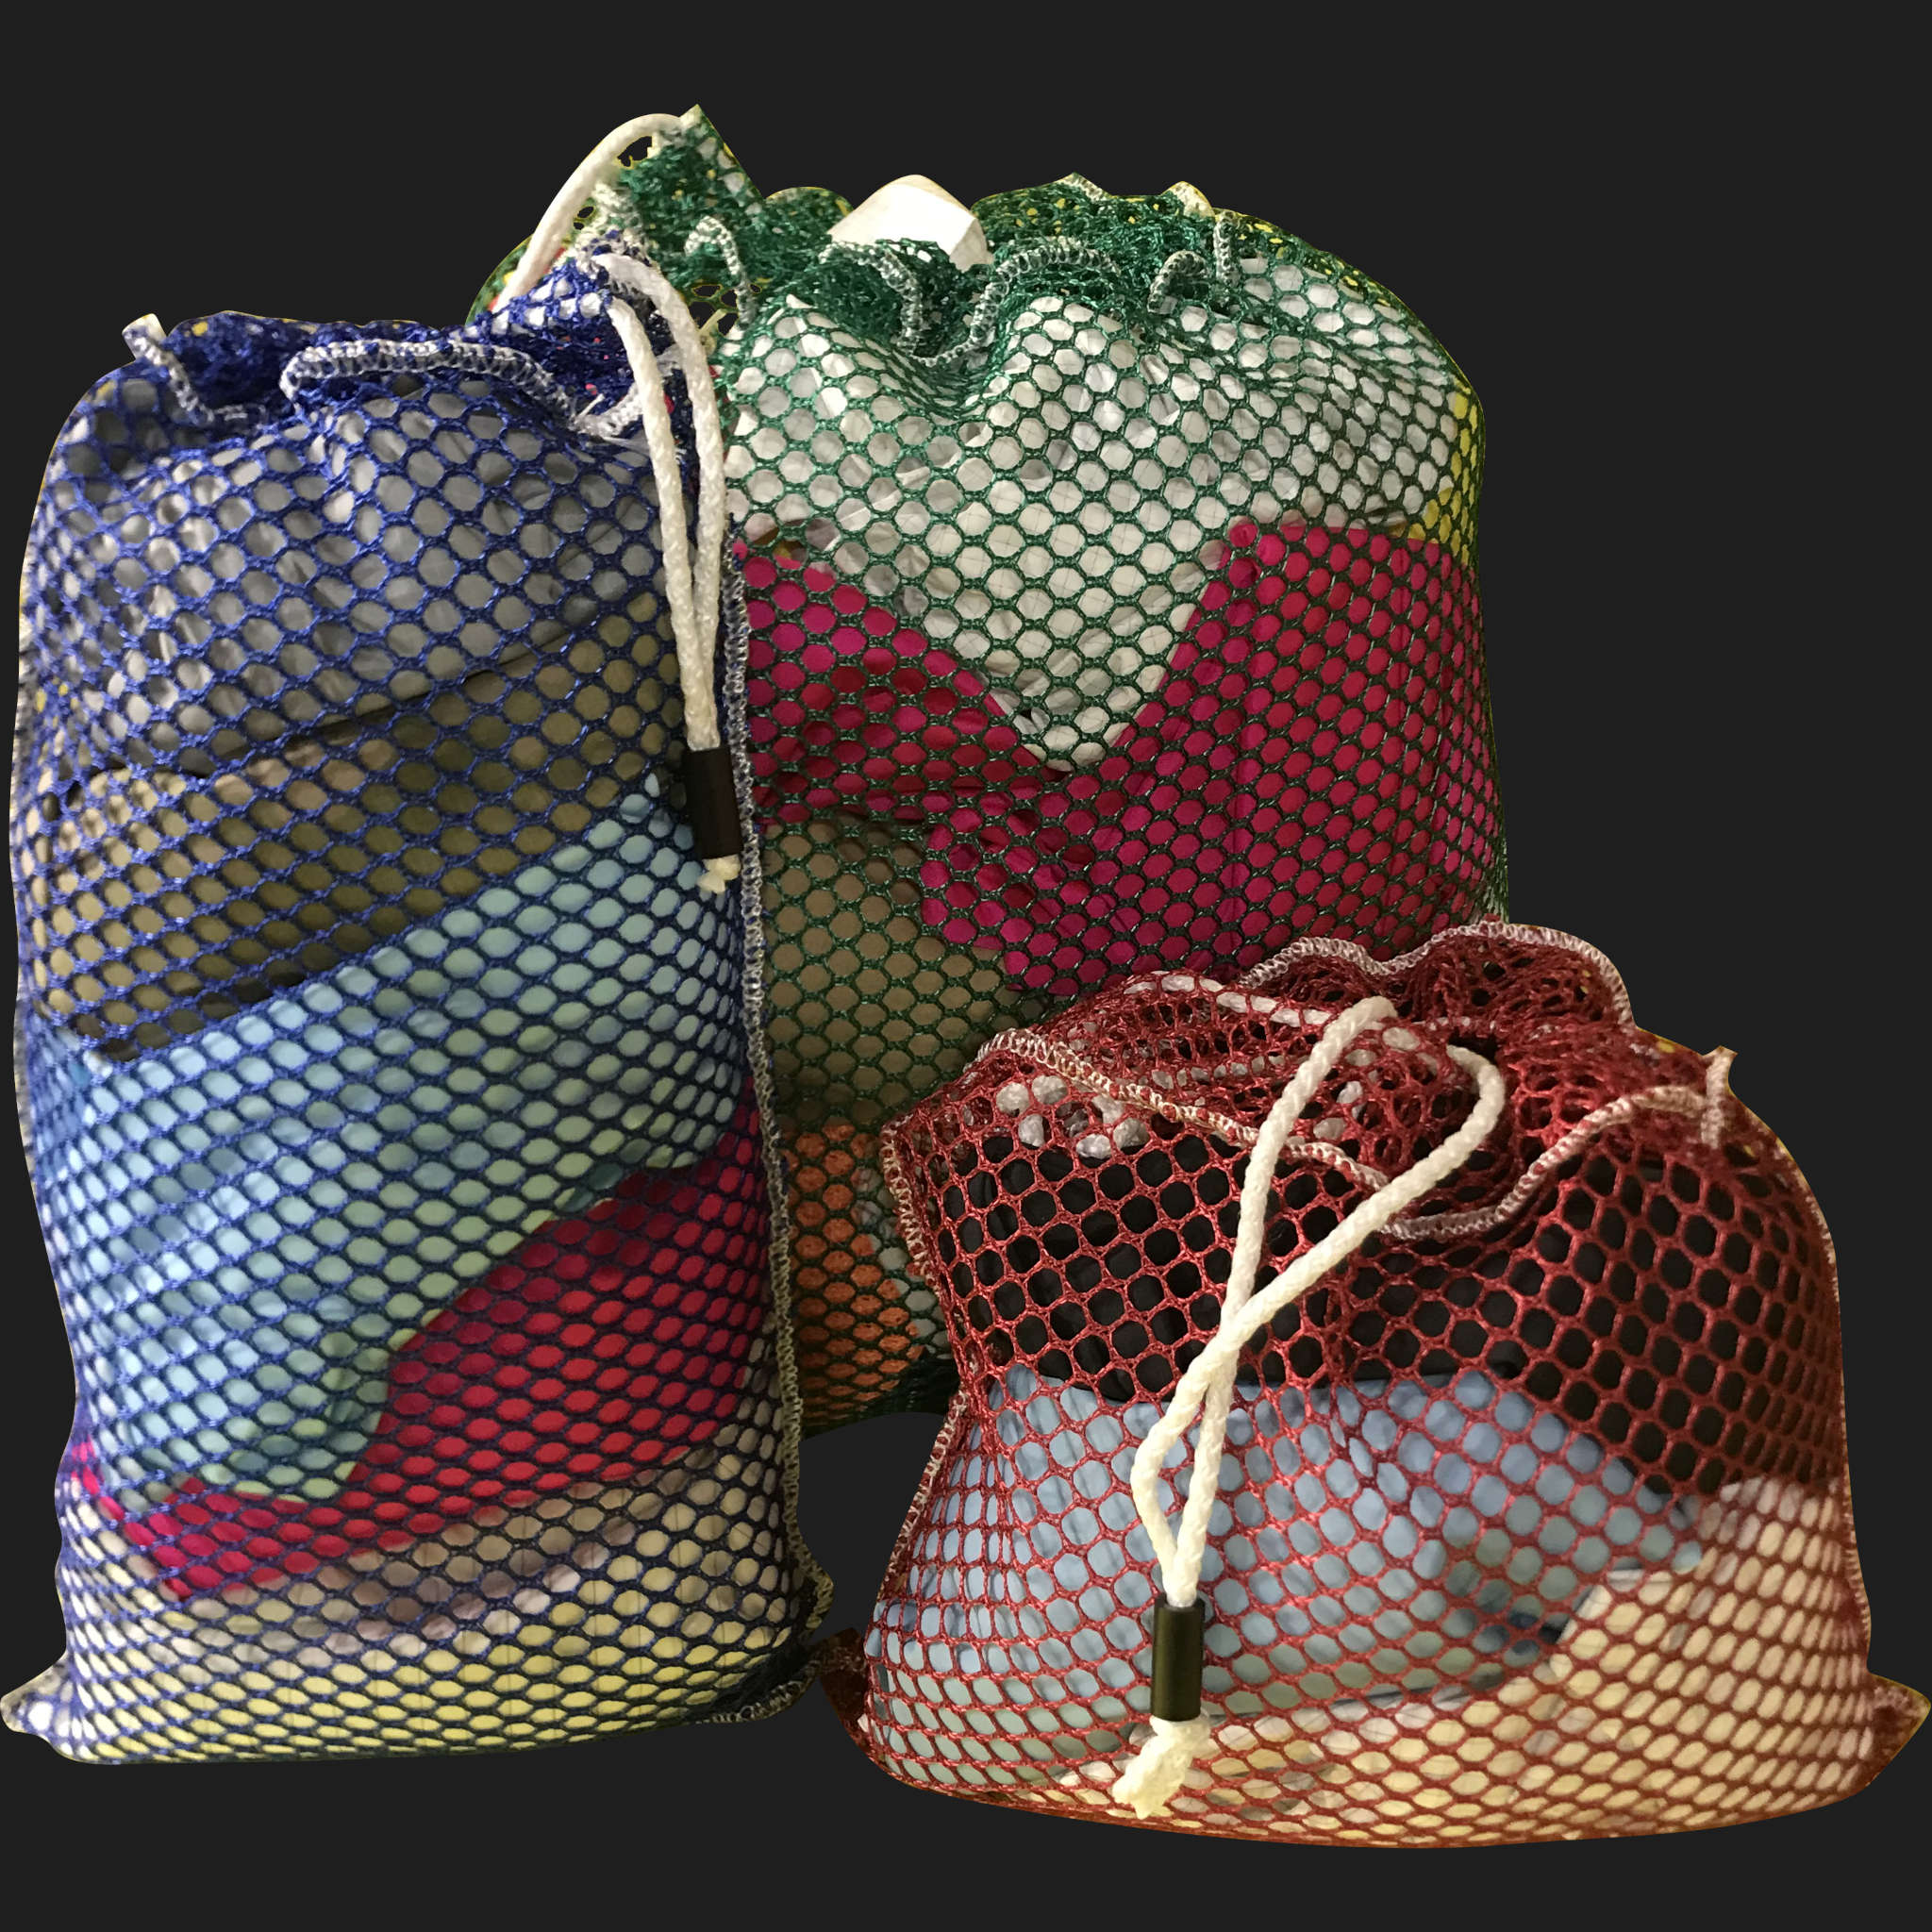 18" x 44" Customized Mesh-Net-Laundry Bags Heavy Duty with Cord and barrellock closure